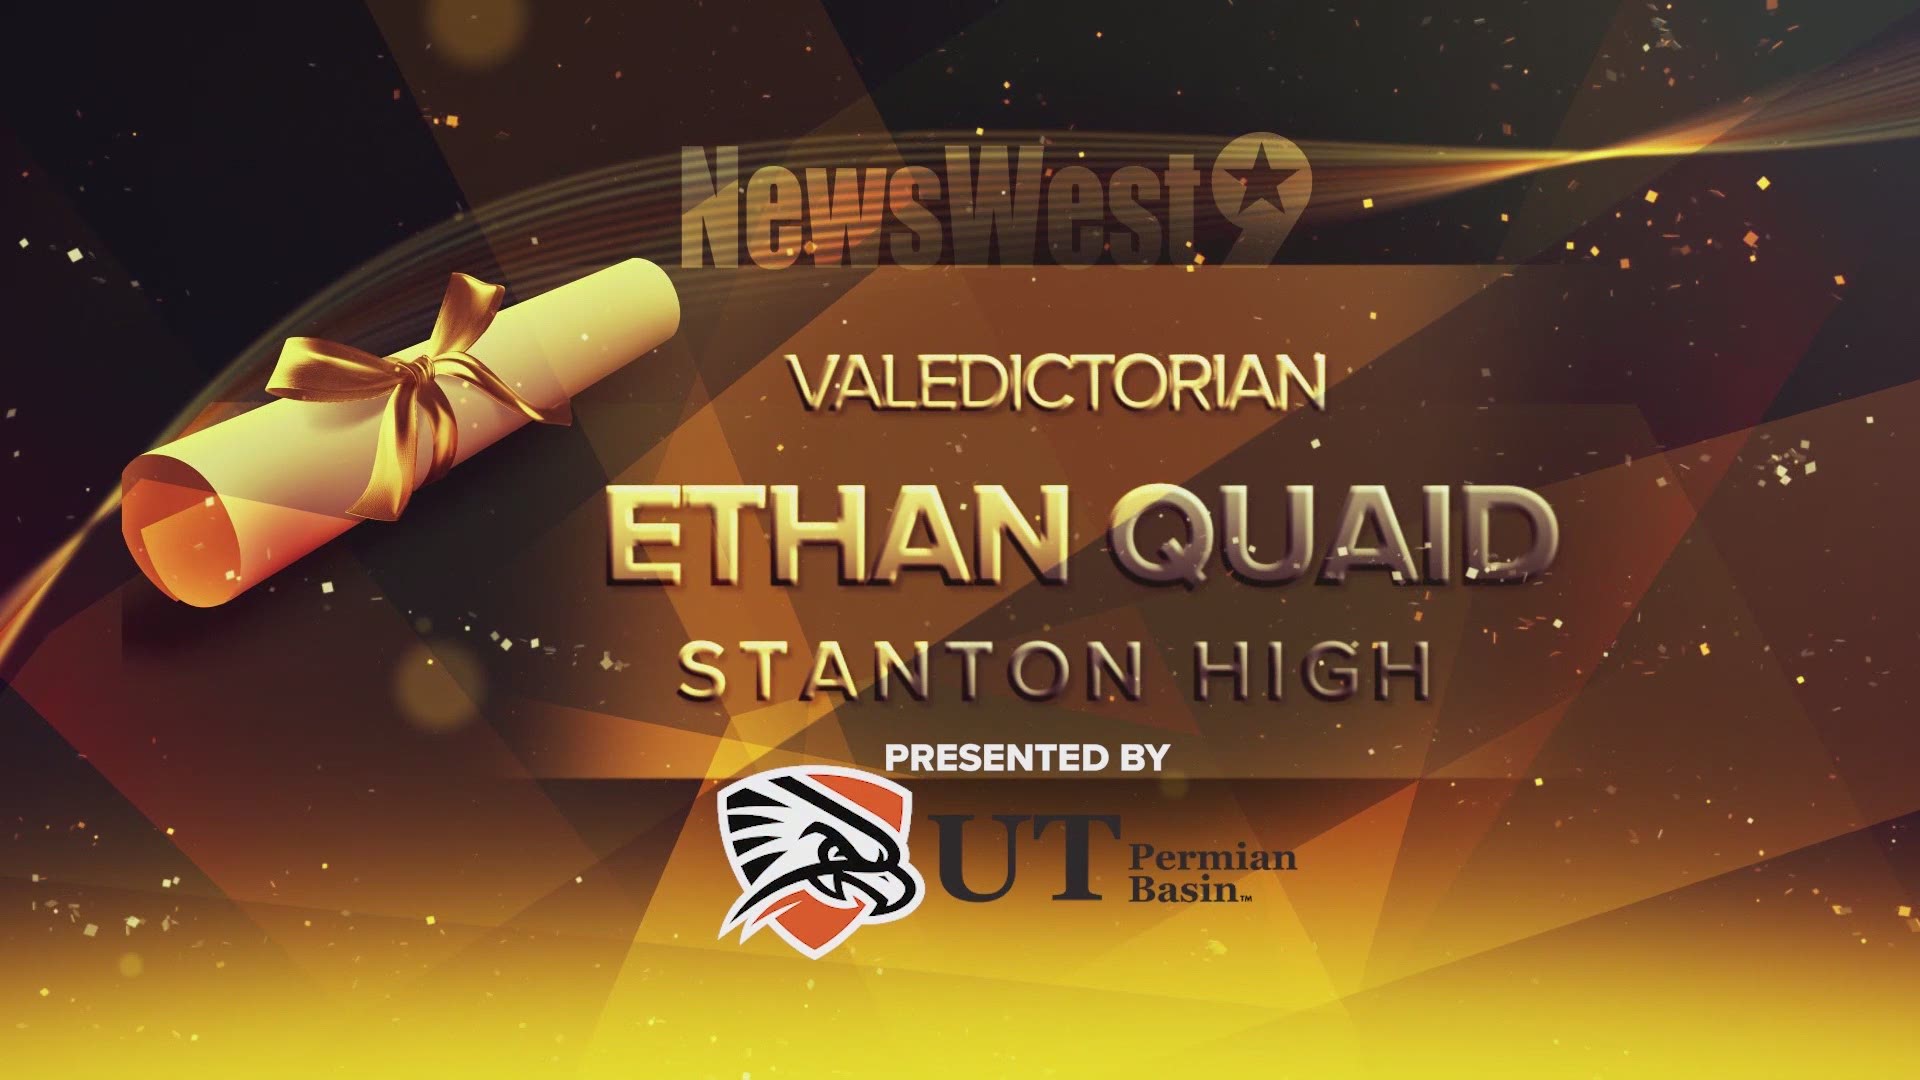 Ethan Quaid delivers the Valedictorian speech for Stanton High